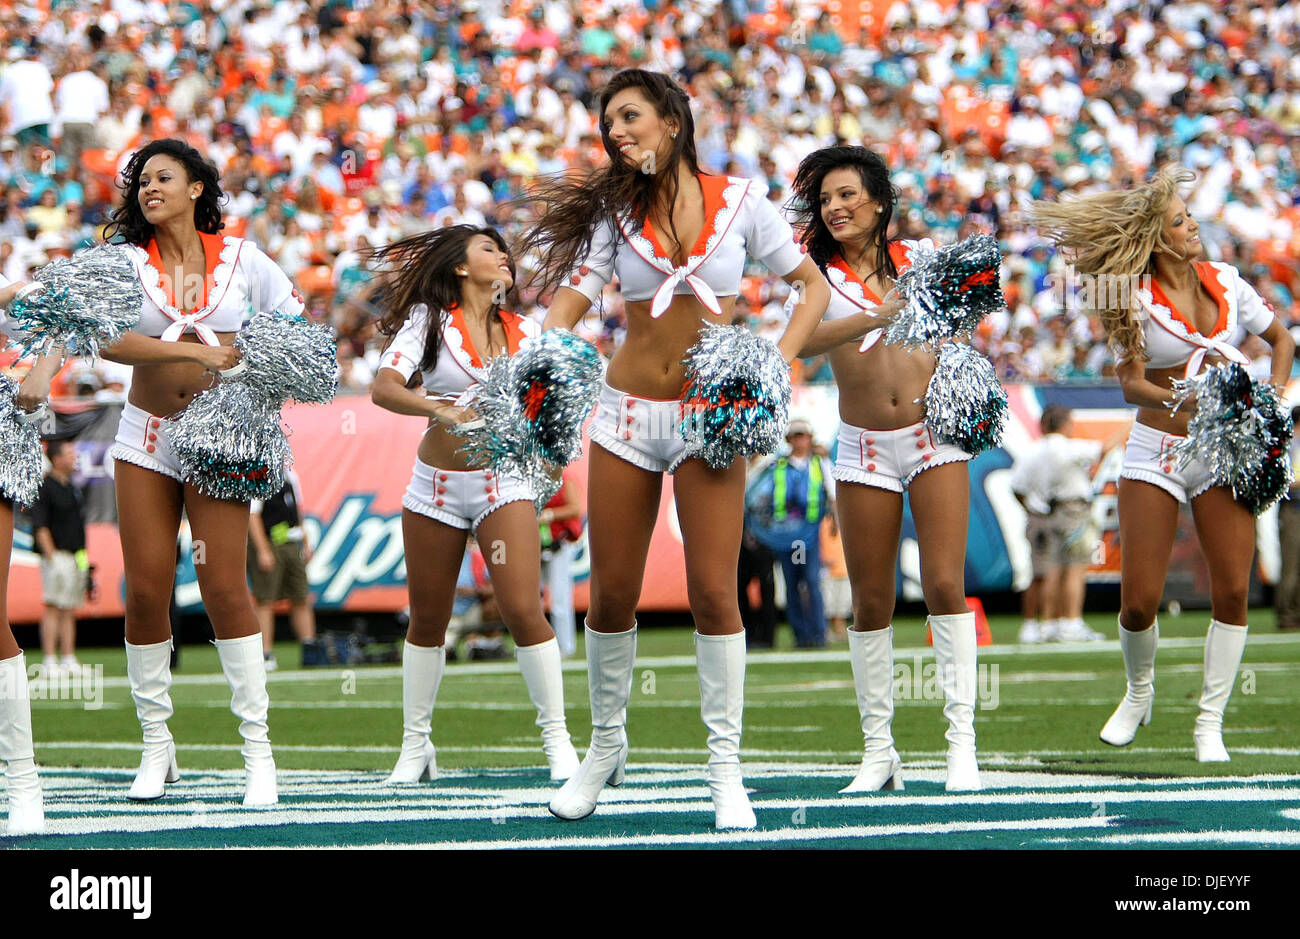 Nov 11, 2007 - Miami Gardens, Florida, USA - Miami Dolphins cheerleaders in action during the Dolphins game against the Buffalo Bills Sunday at Dolphin stadium.   (Credit Image: © Bill Ingram/Palm Beach Post/ZUMA Press) RESTRICTIONS: USA Tabloid RIGHTS OUT! Stock Photo